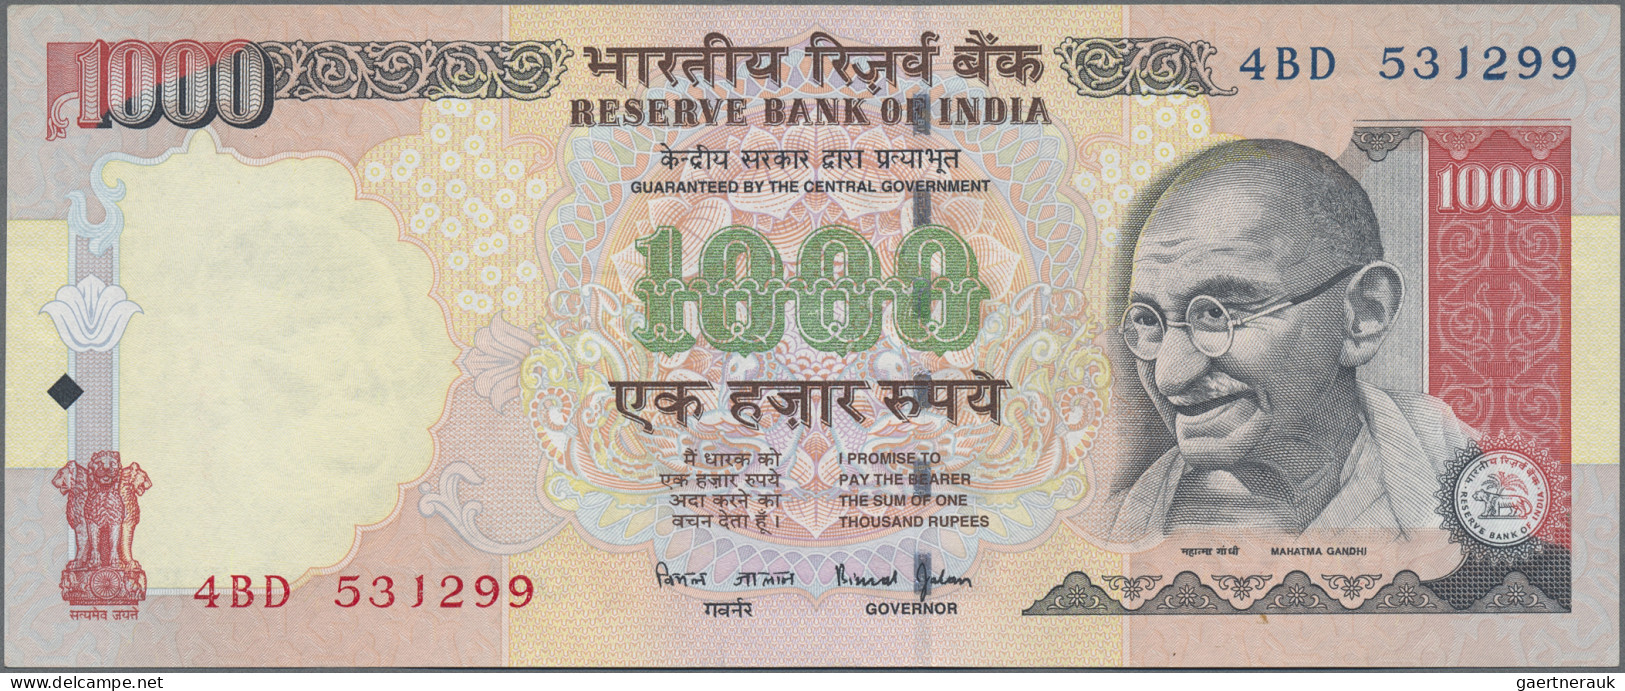 India: Government and Reserve Bank of India, giant lot with 45 banknotes 1-1.000